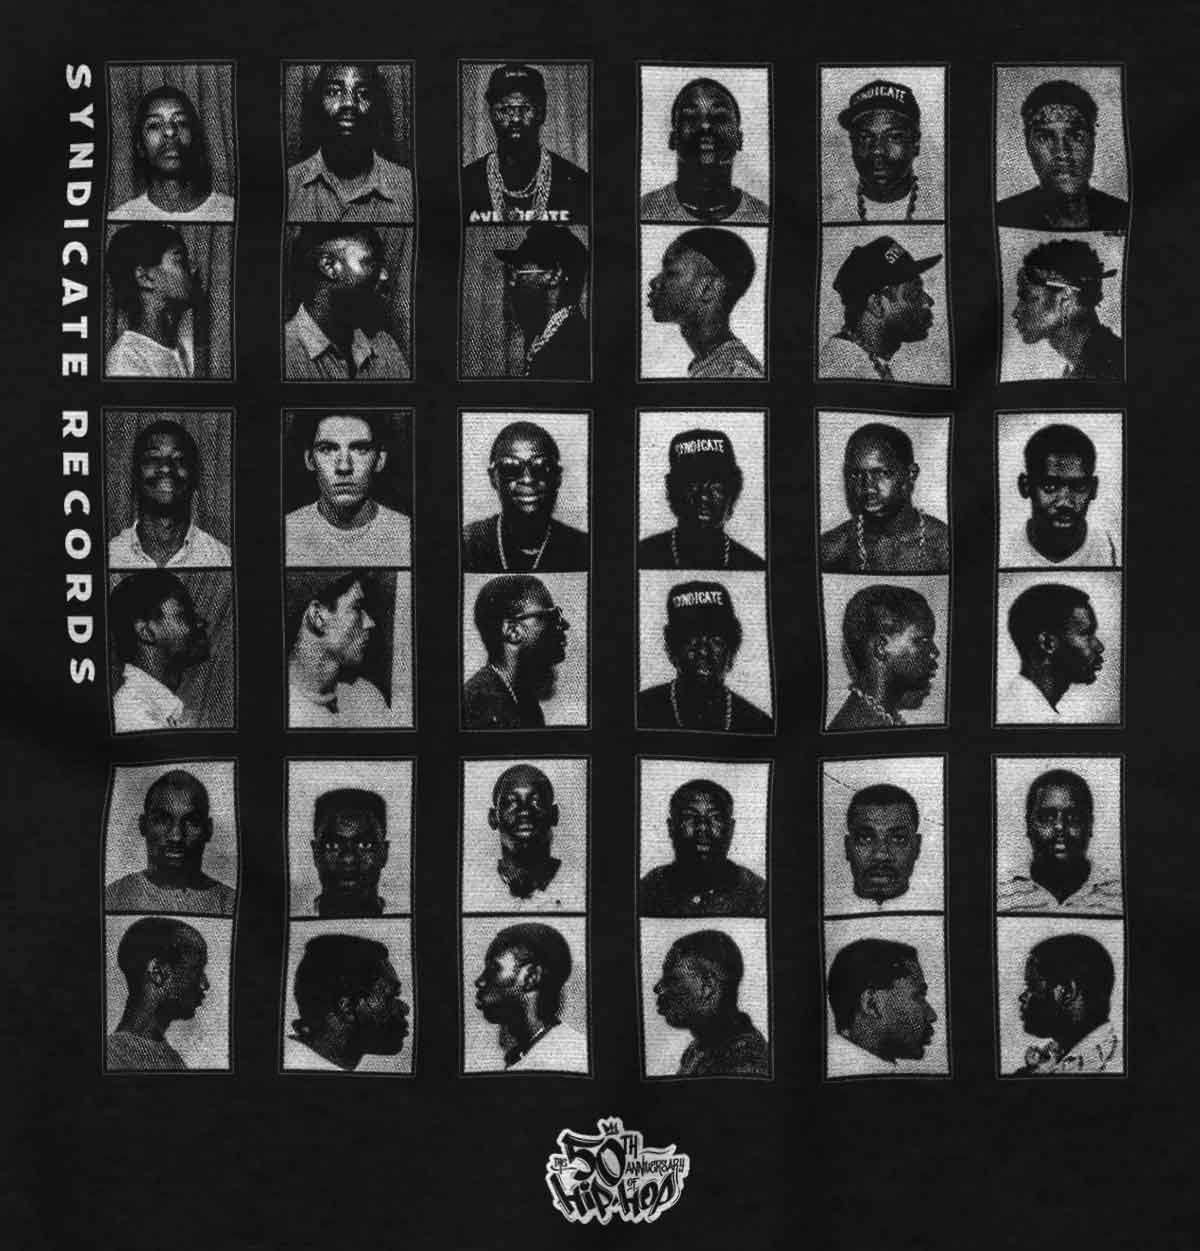 This image showcases the mugshots of many Hip Hop legends and artists. Immerse yourself in the beats, rhymes, and stories that shaped a generation.